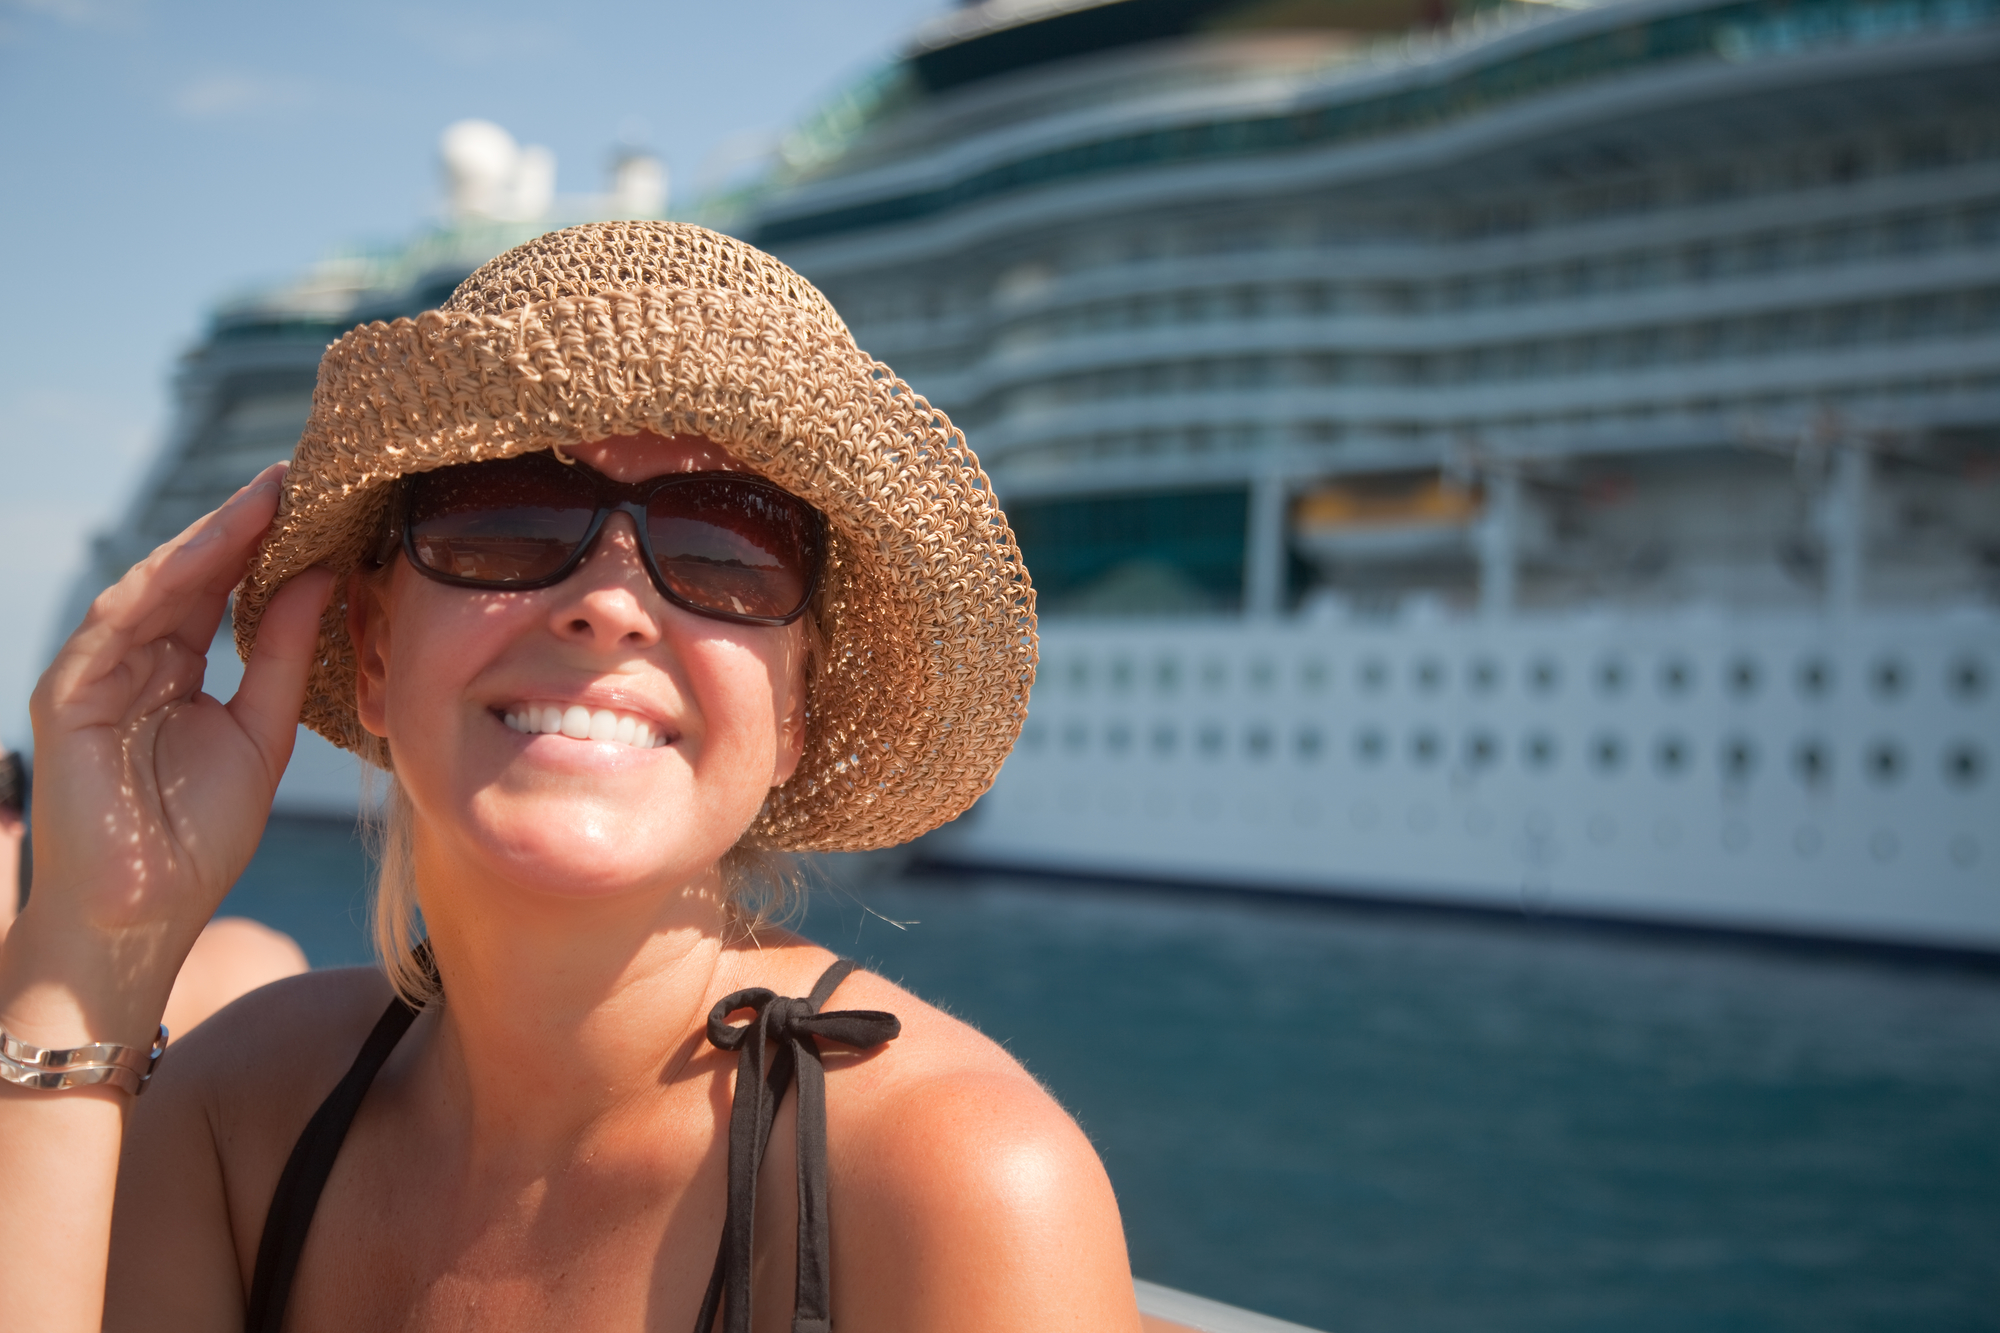 Woman on Tender Boat with Cruise Ship in the Background / By Feverpitch, Deposit Photos